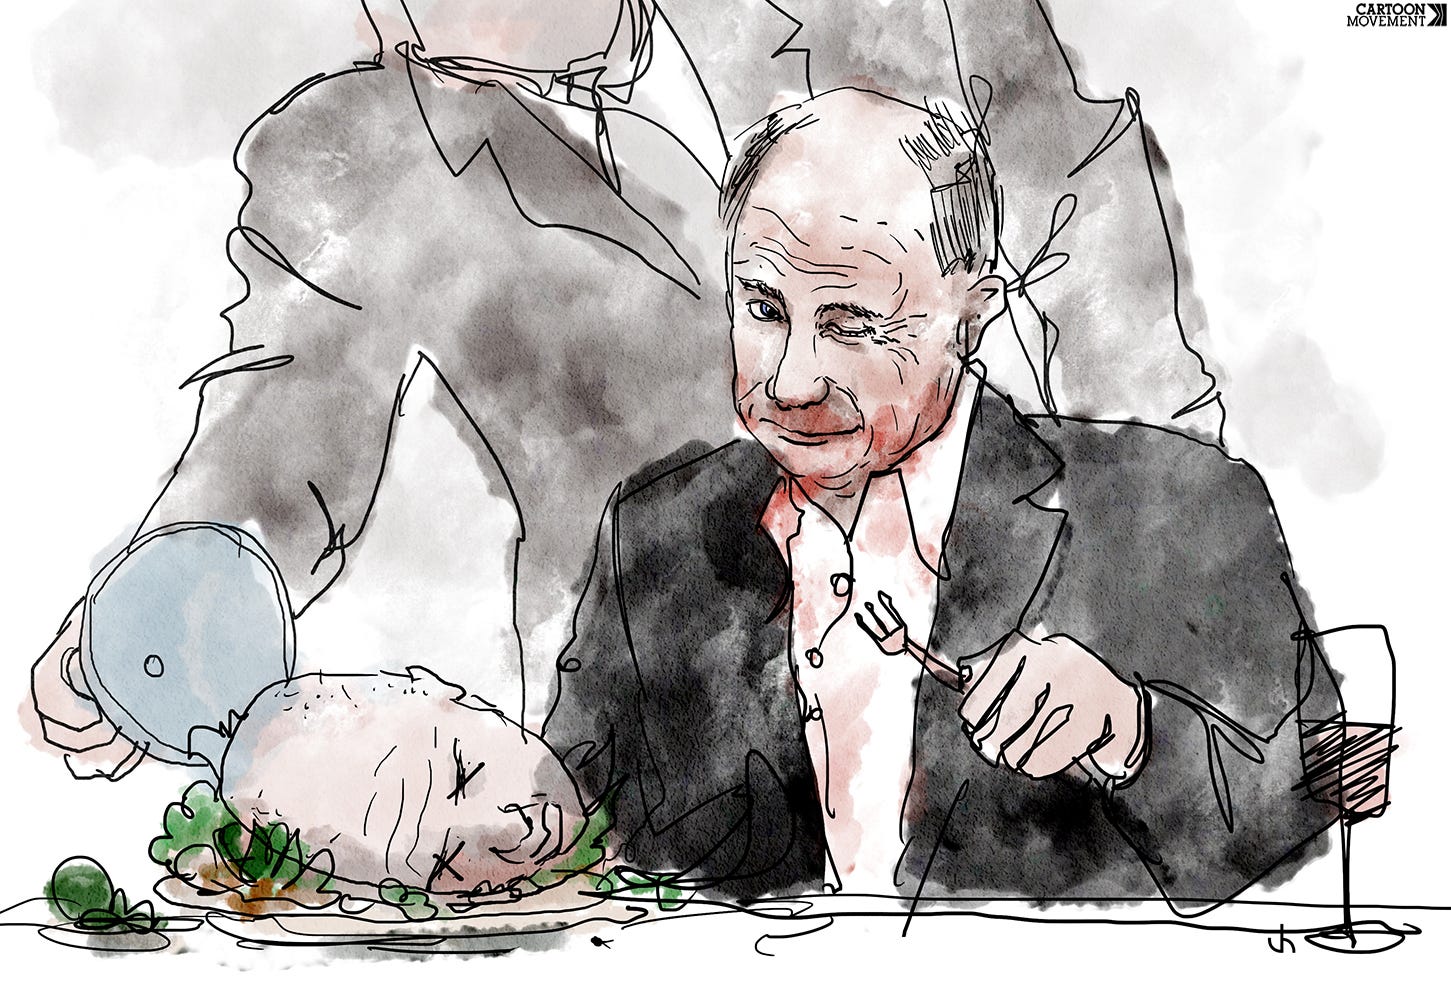 Cartoon about Putin sitting at the dinner table, smiling and winking at the vierwer of the cartoon while a waiter unveils a dish that contains the head of Yevgeny Prigozhin.